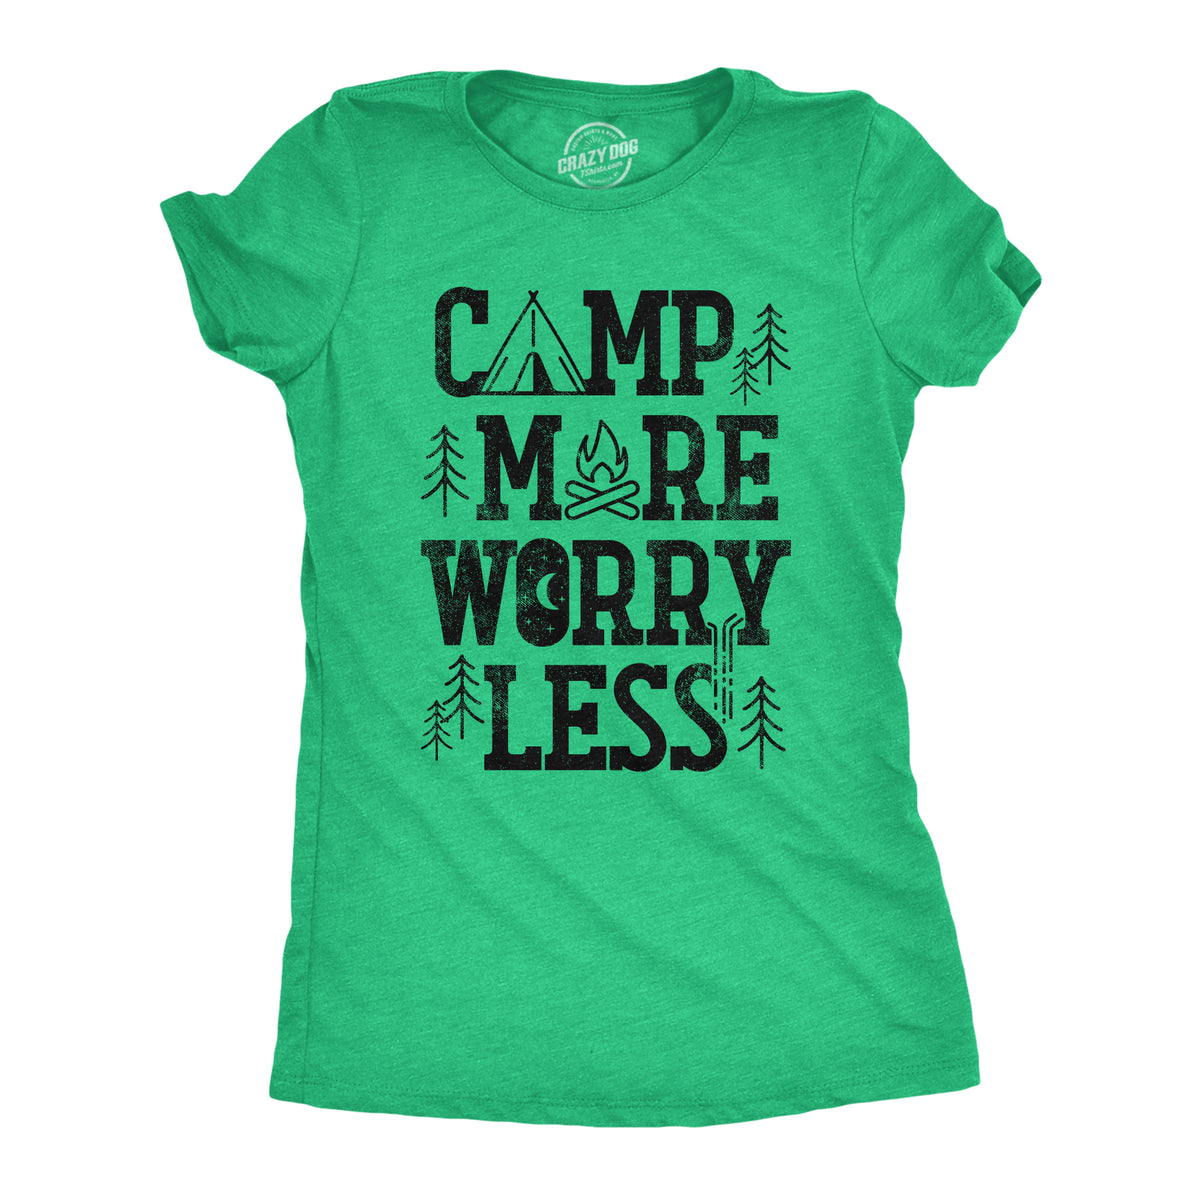 Funny Heather Green Camp More Worry Less Womens T Shirt Nerdy Camping Retro Tee